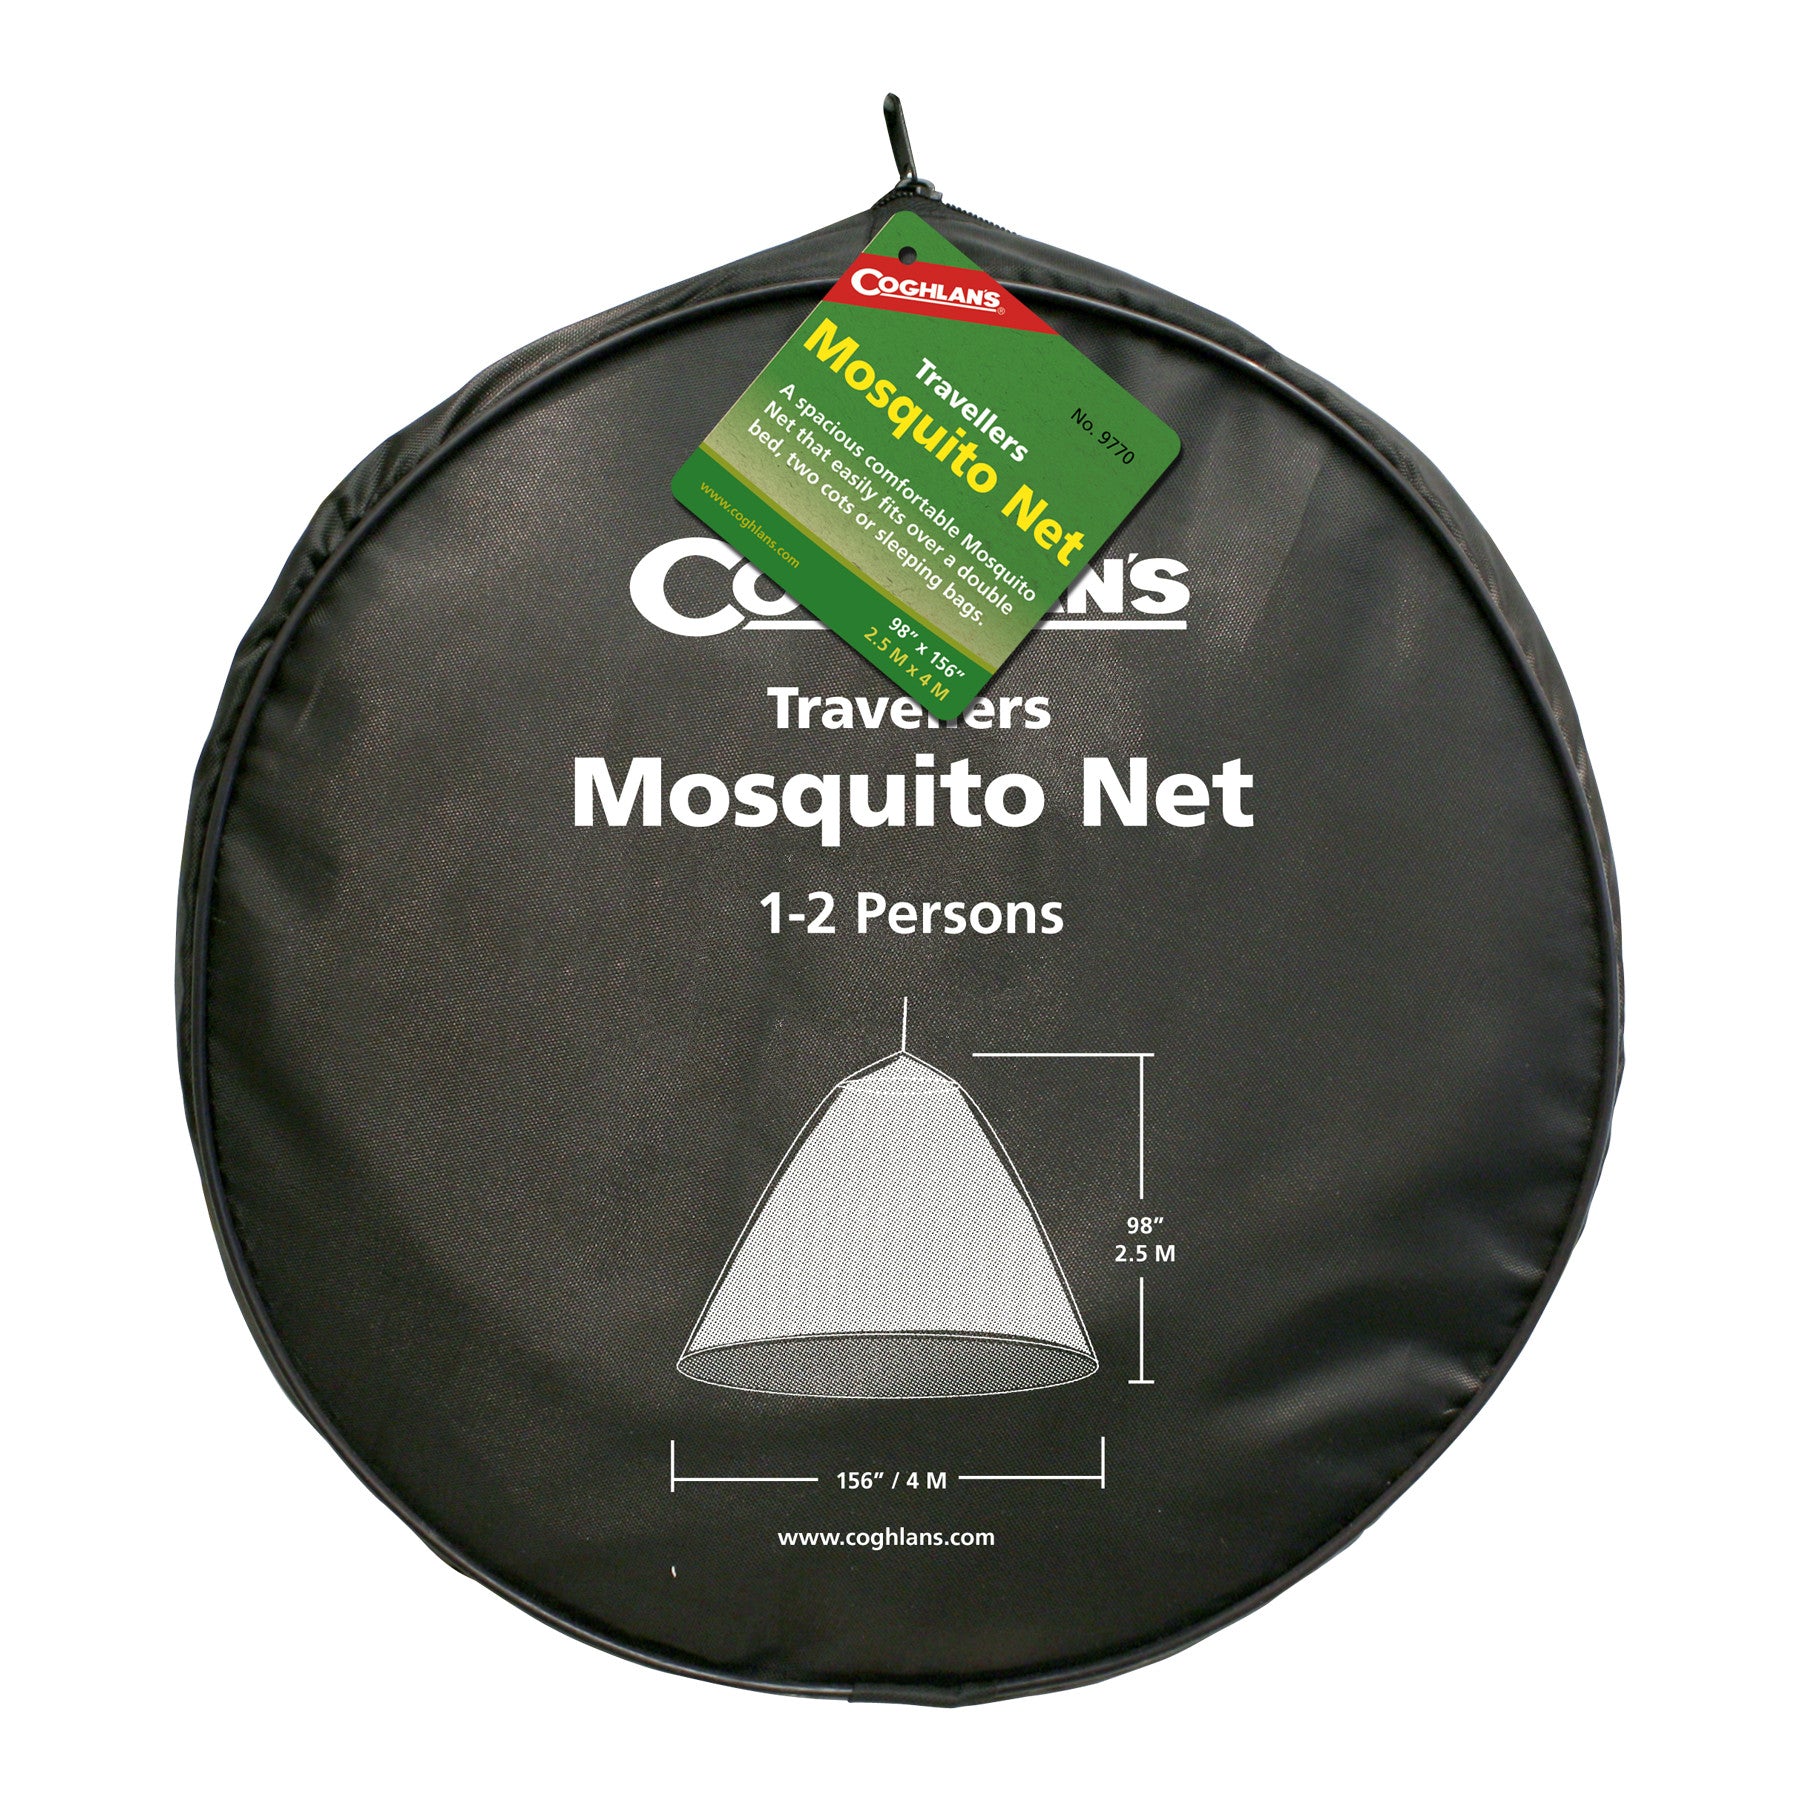 Coghlan's Mosquito Net Travellers